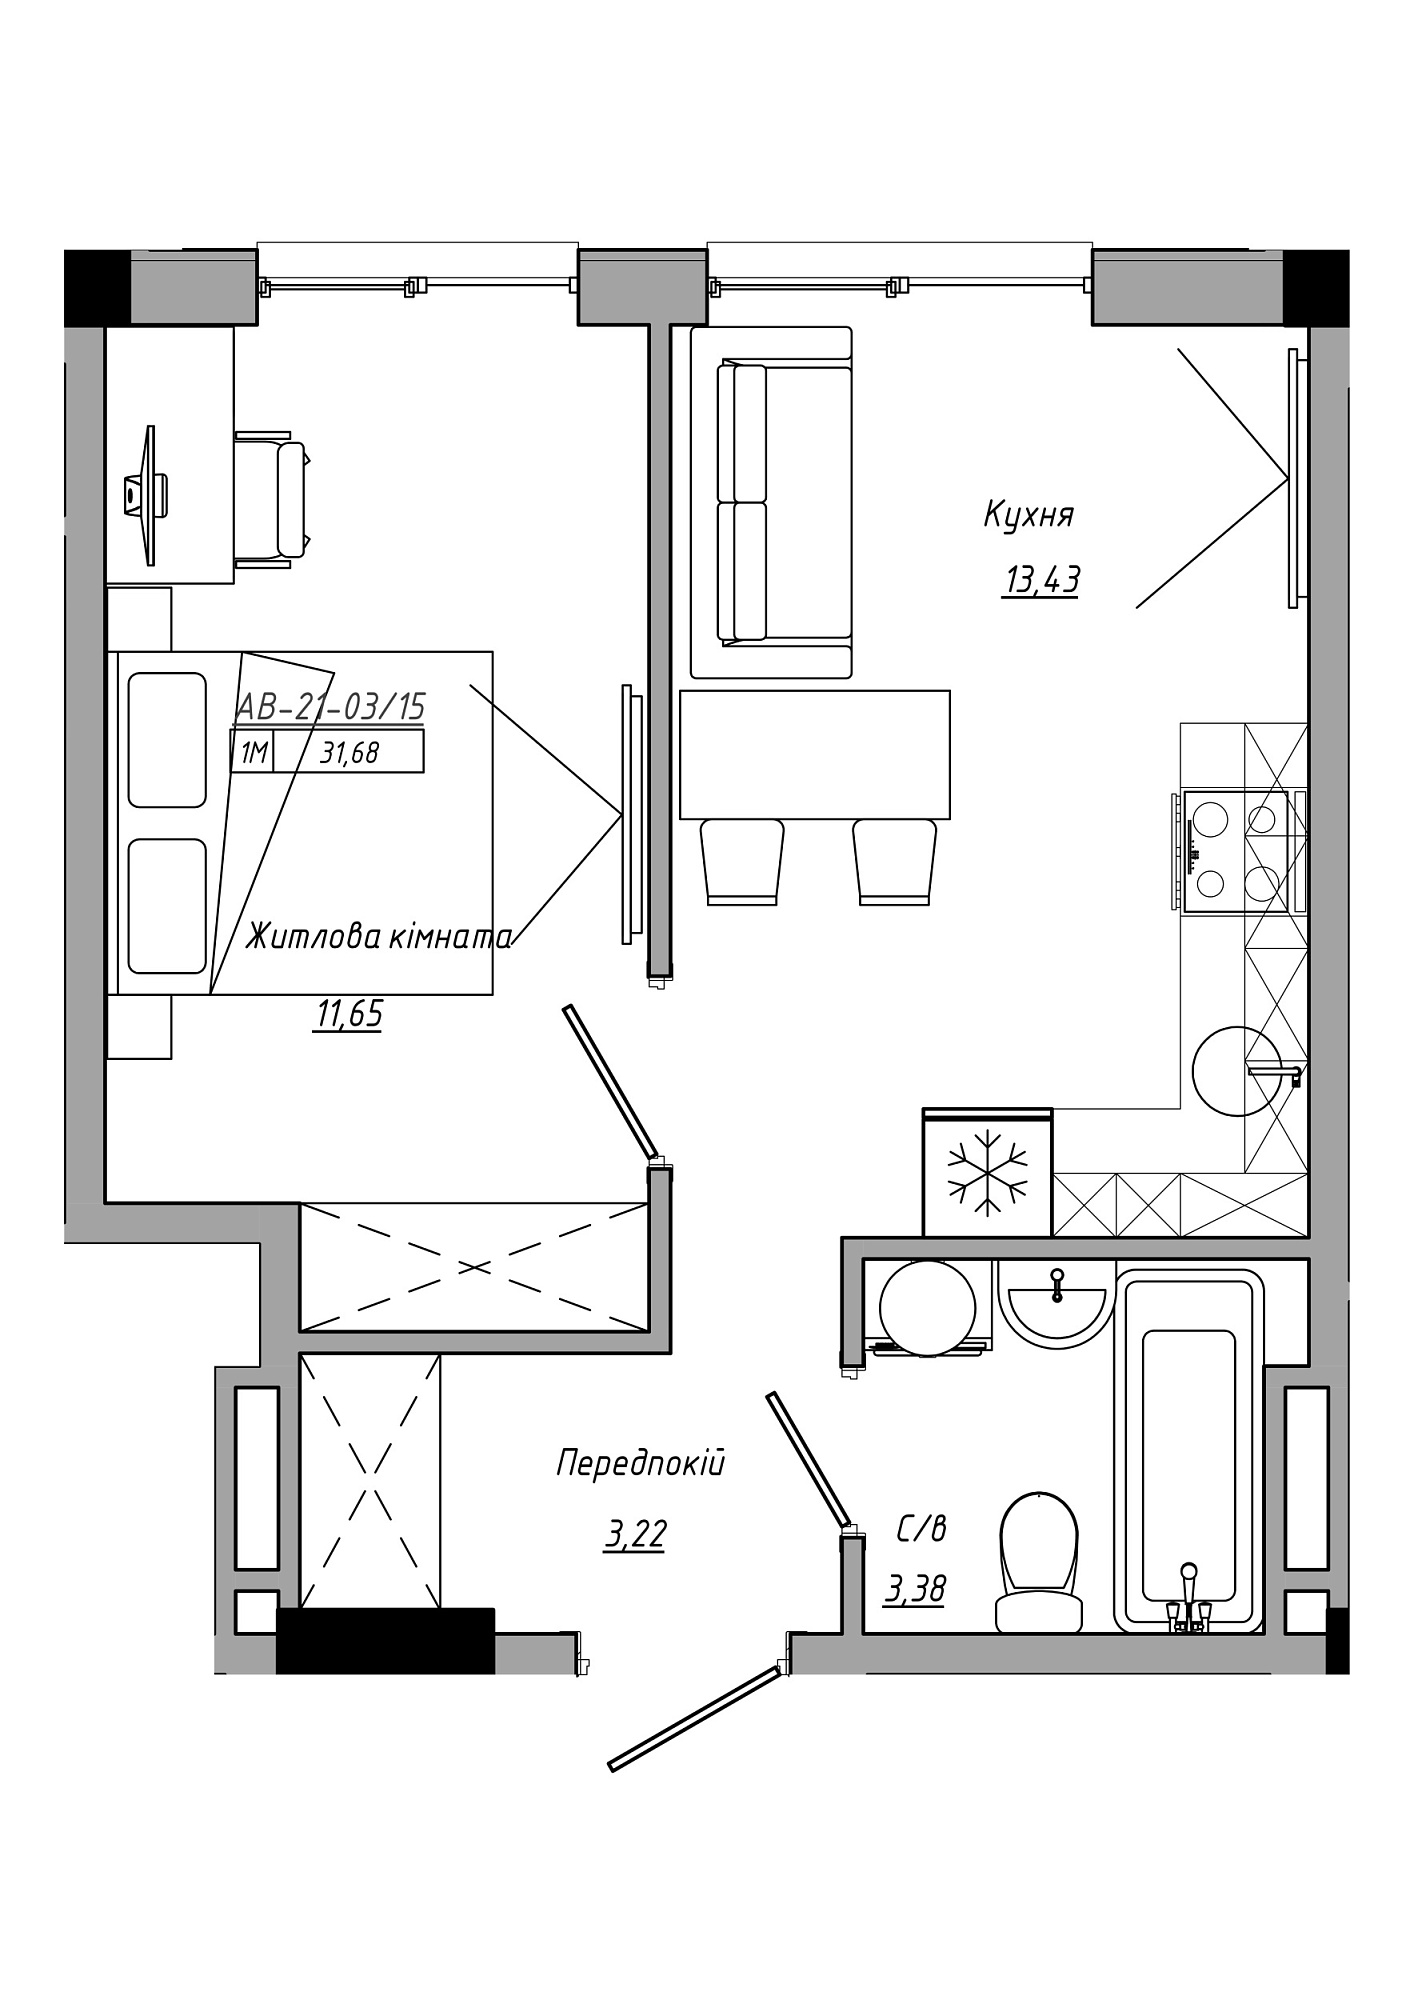 Planning 1-rm flats area 31.68m2, AB-21-03/00015.